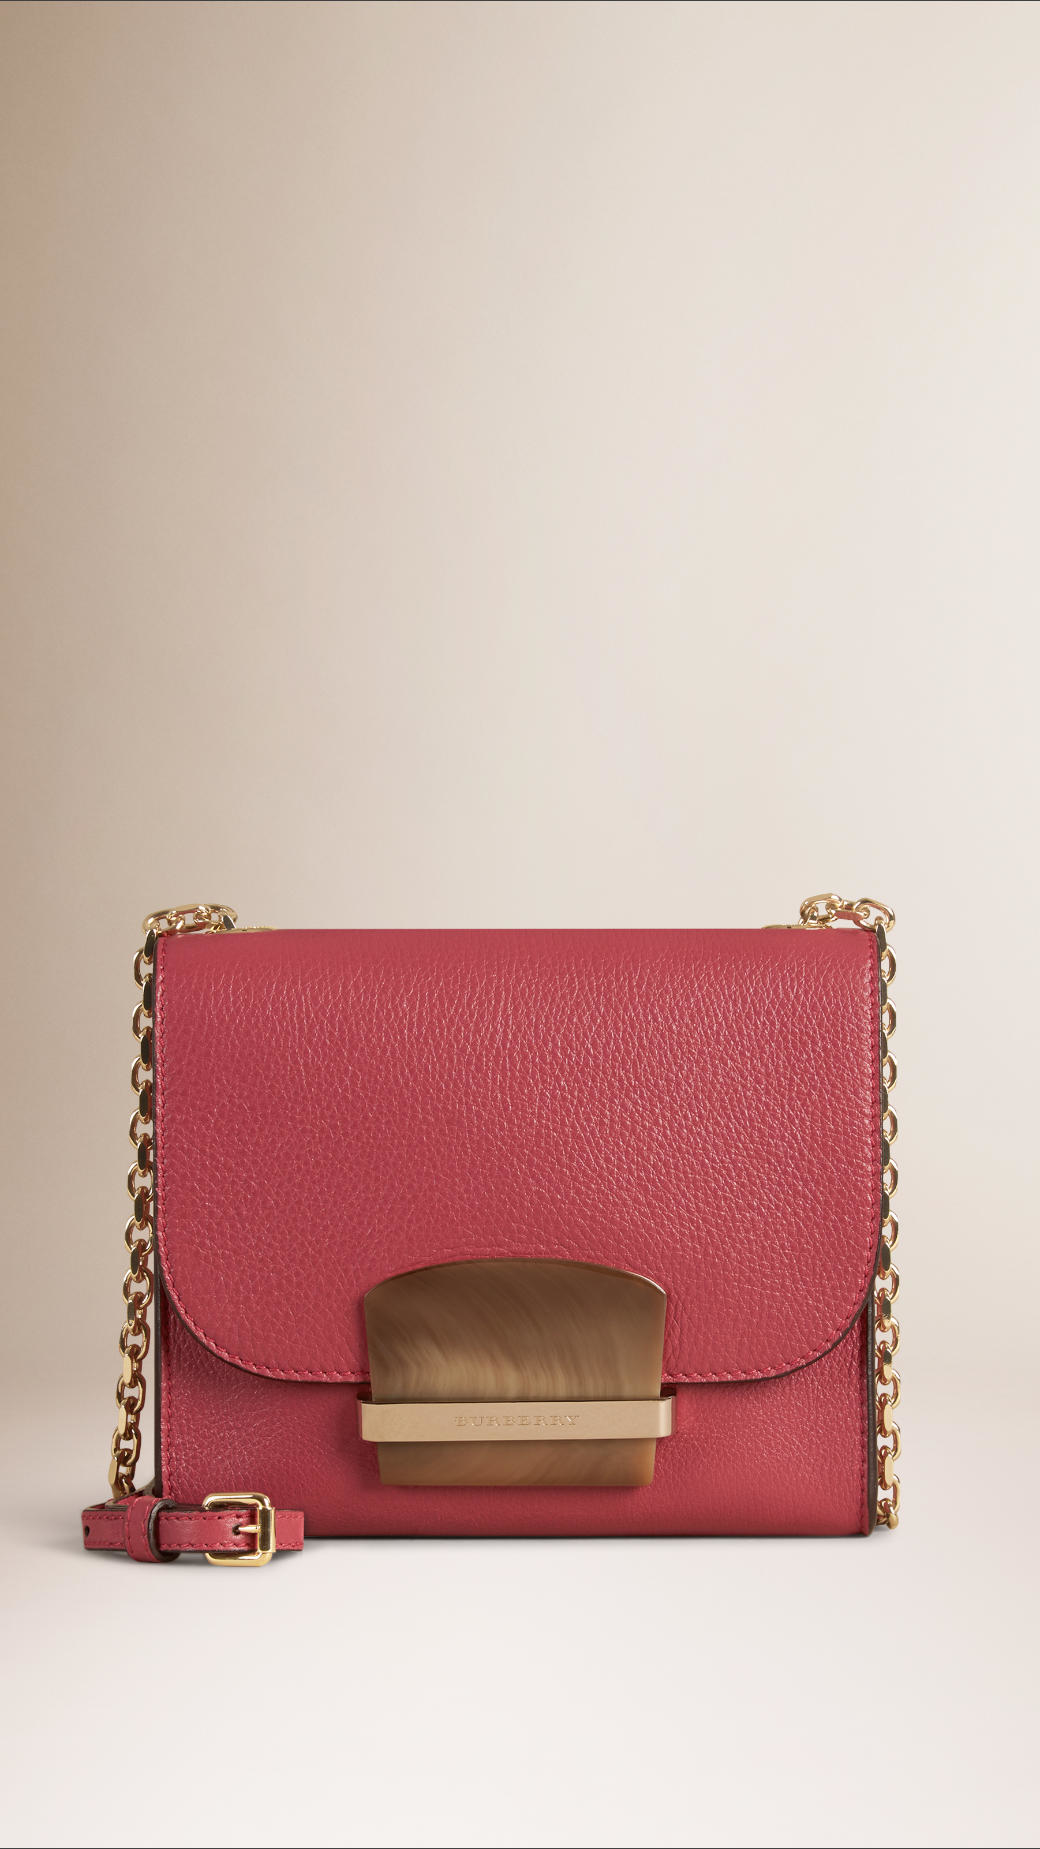 Burberry Small Leather Crossbody Bag in Pink - Lyst